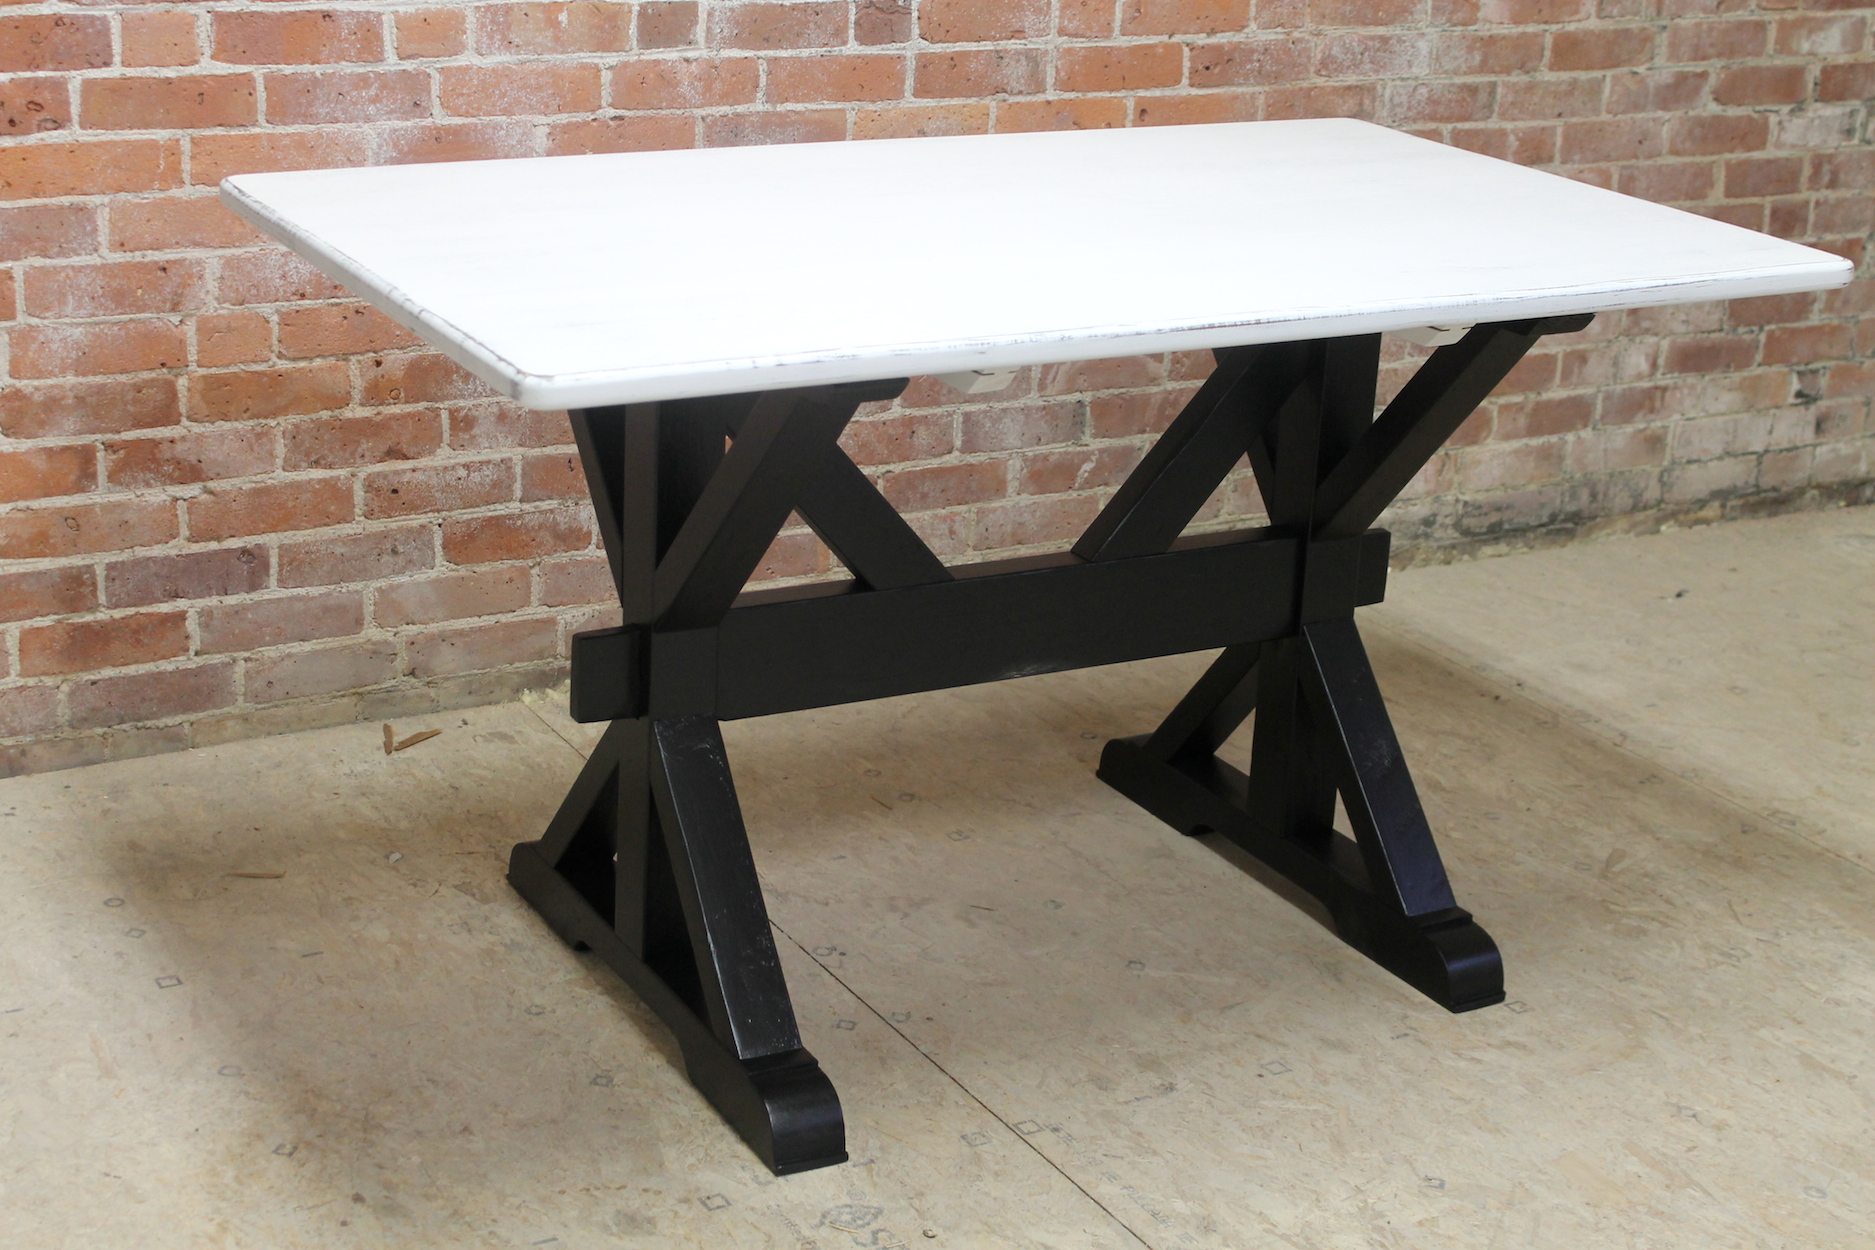 Minimalist X Base Trestle Table for Small Space